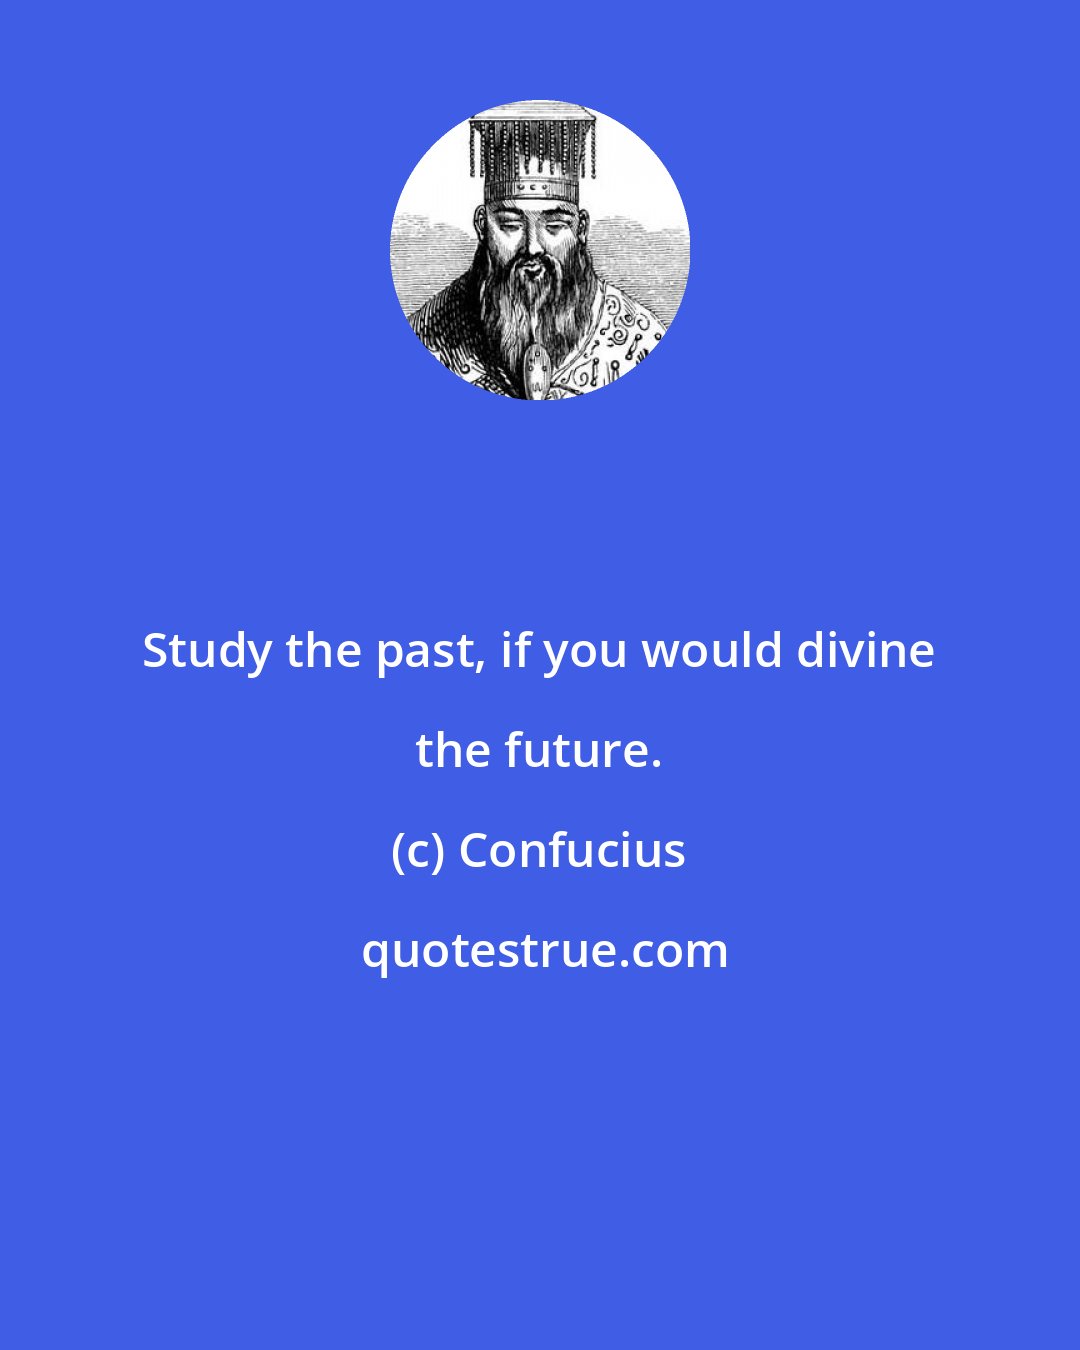 Confucius: Study the past, if you would divine the future.